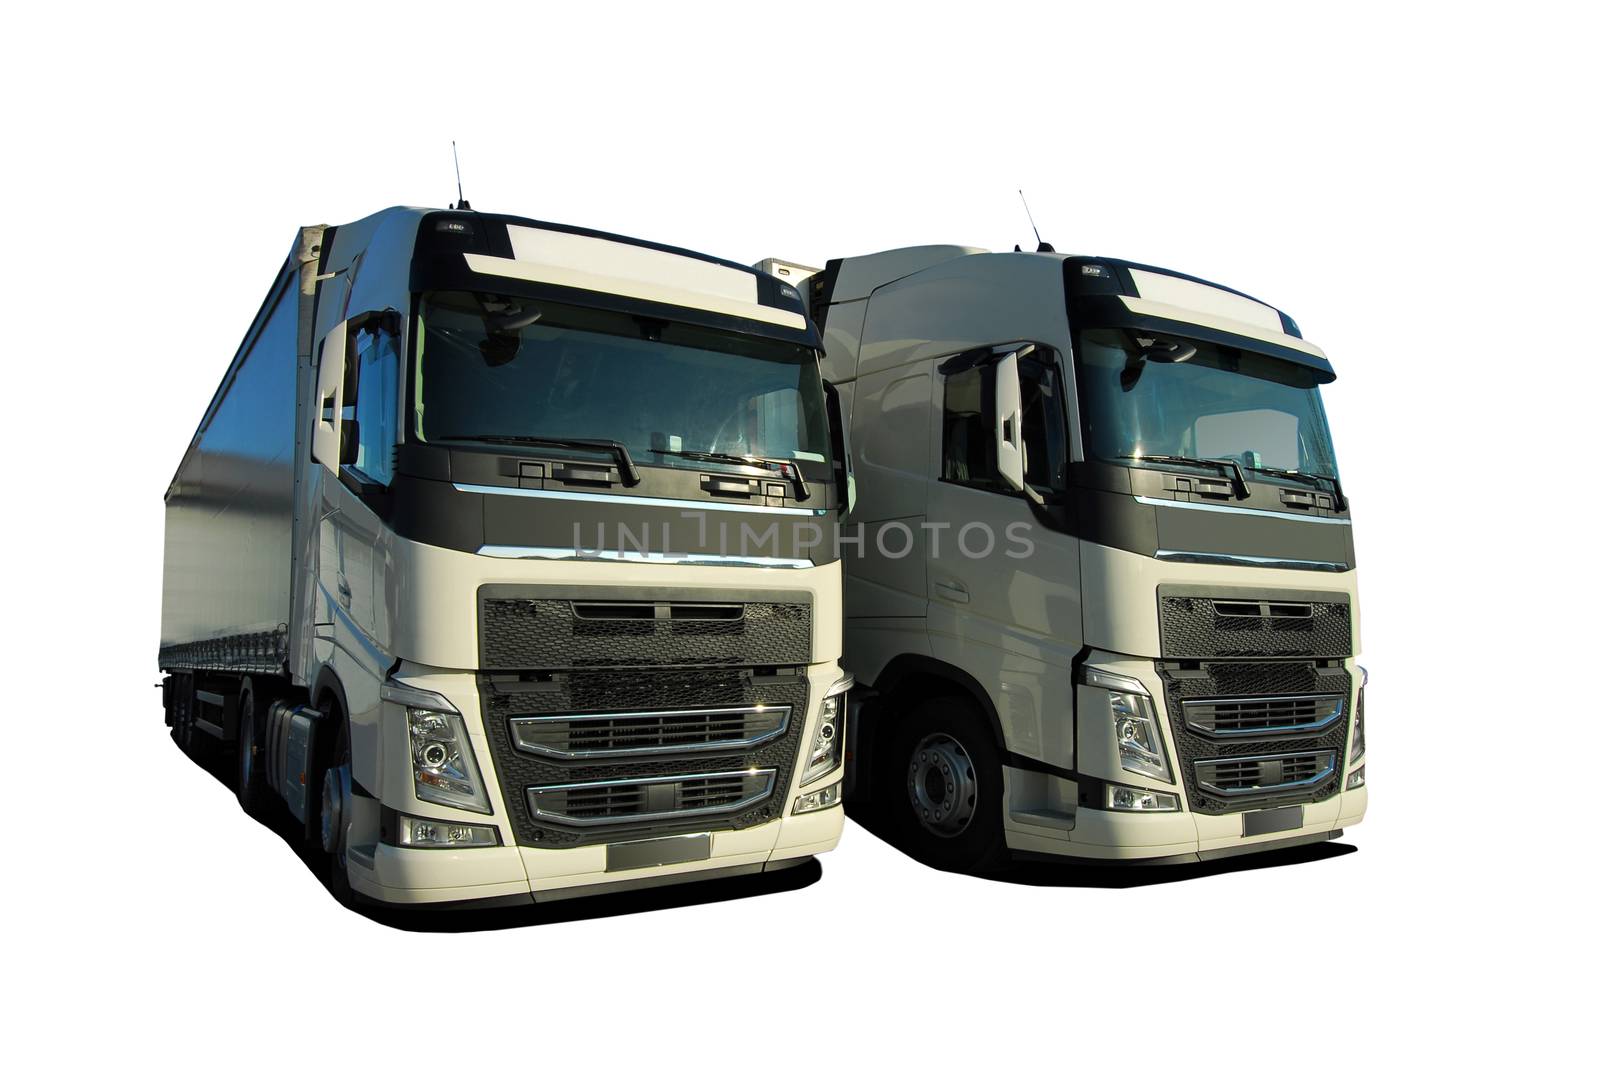 two large trucks with semi trailer on a white background